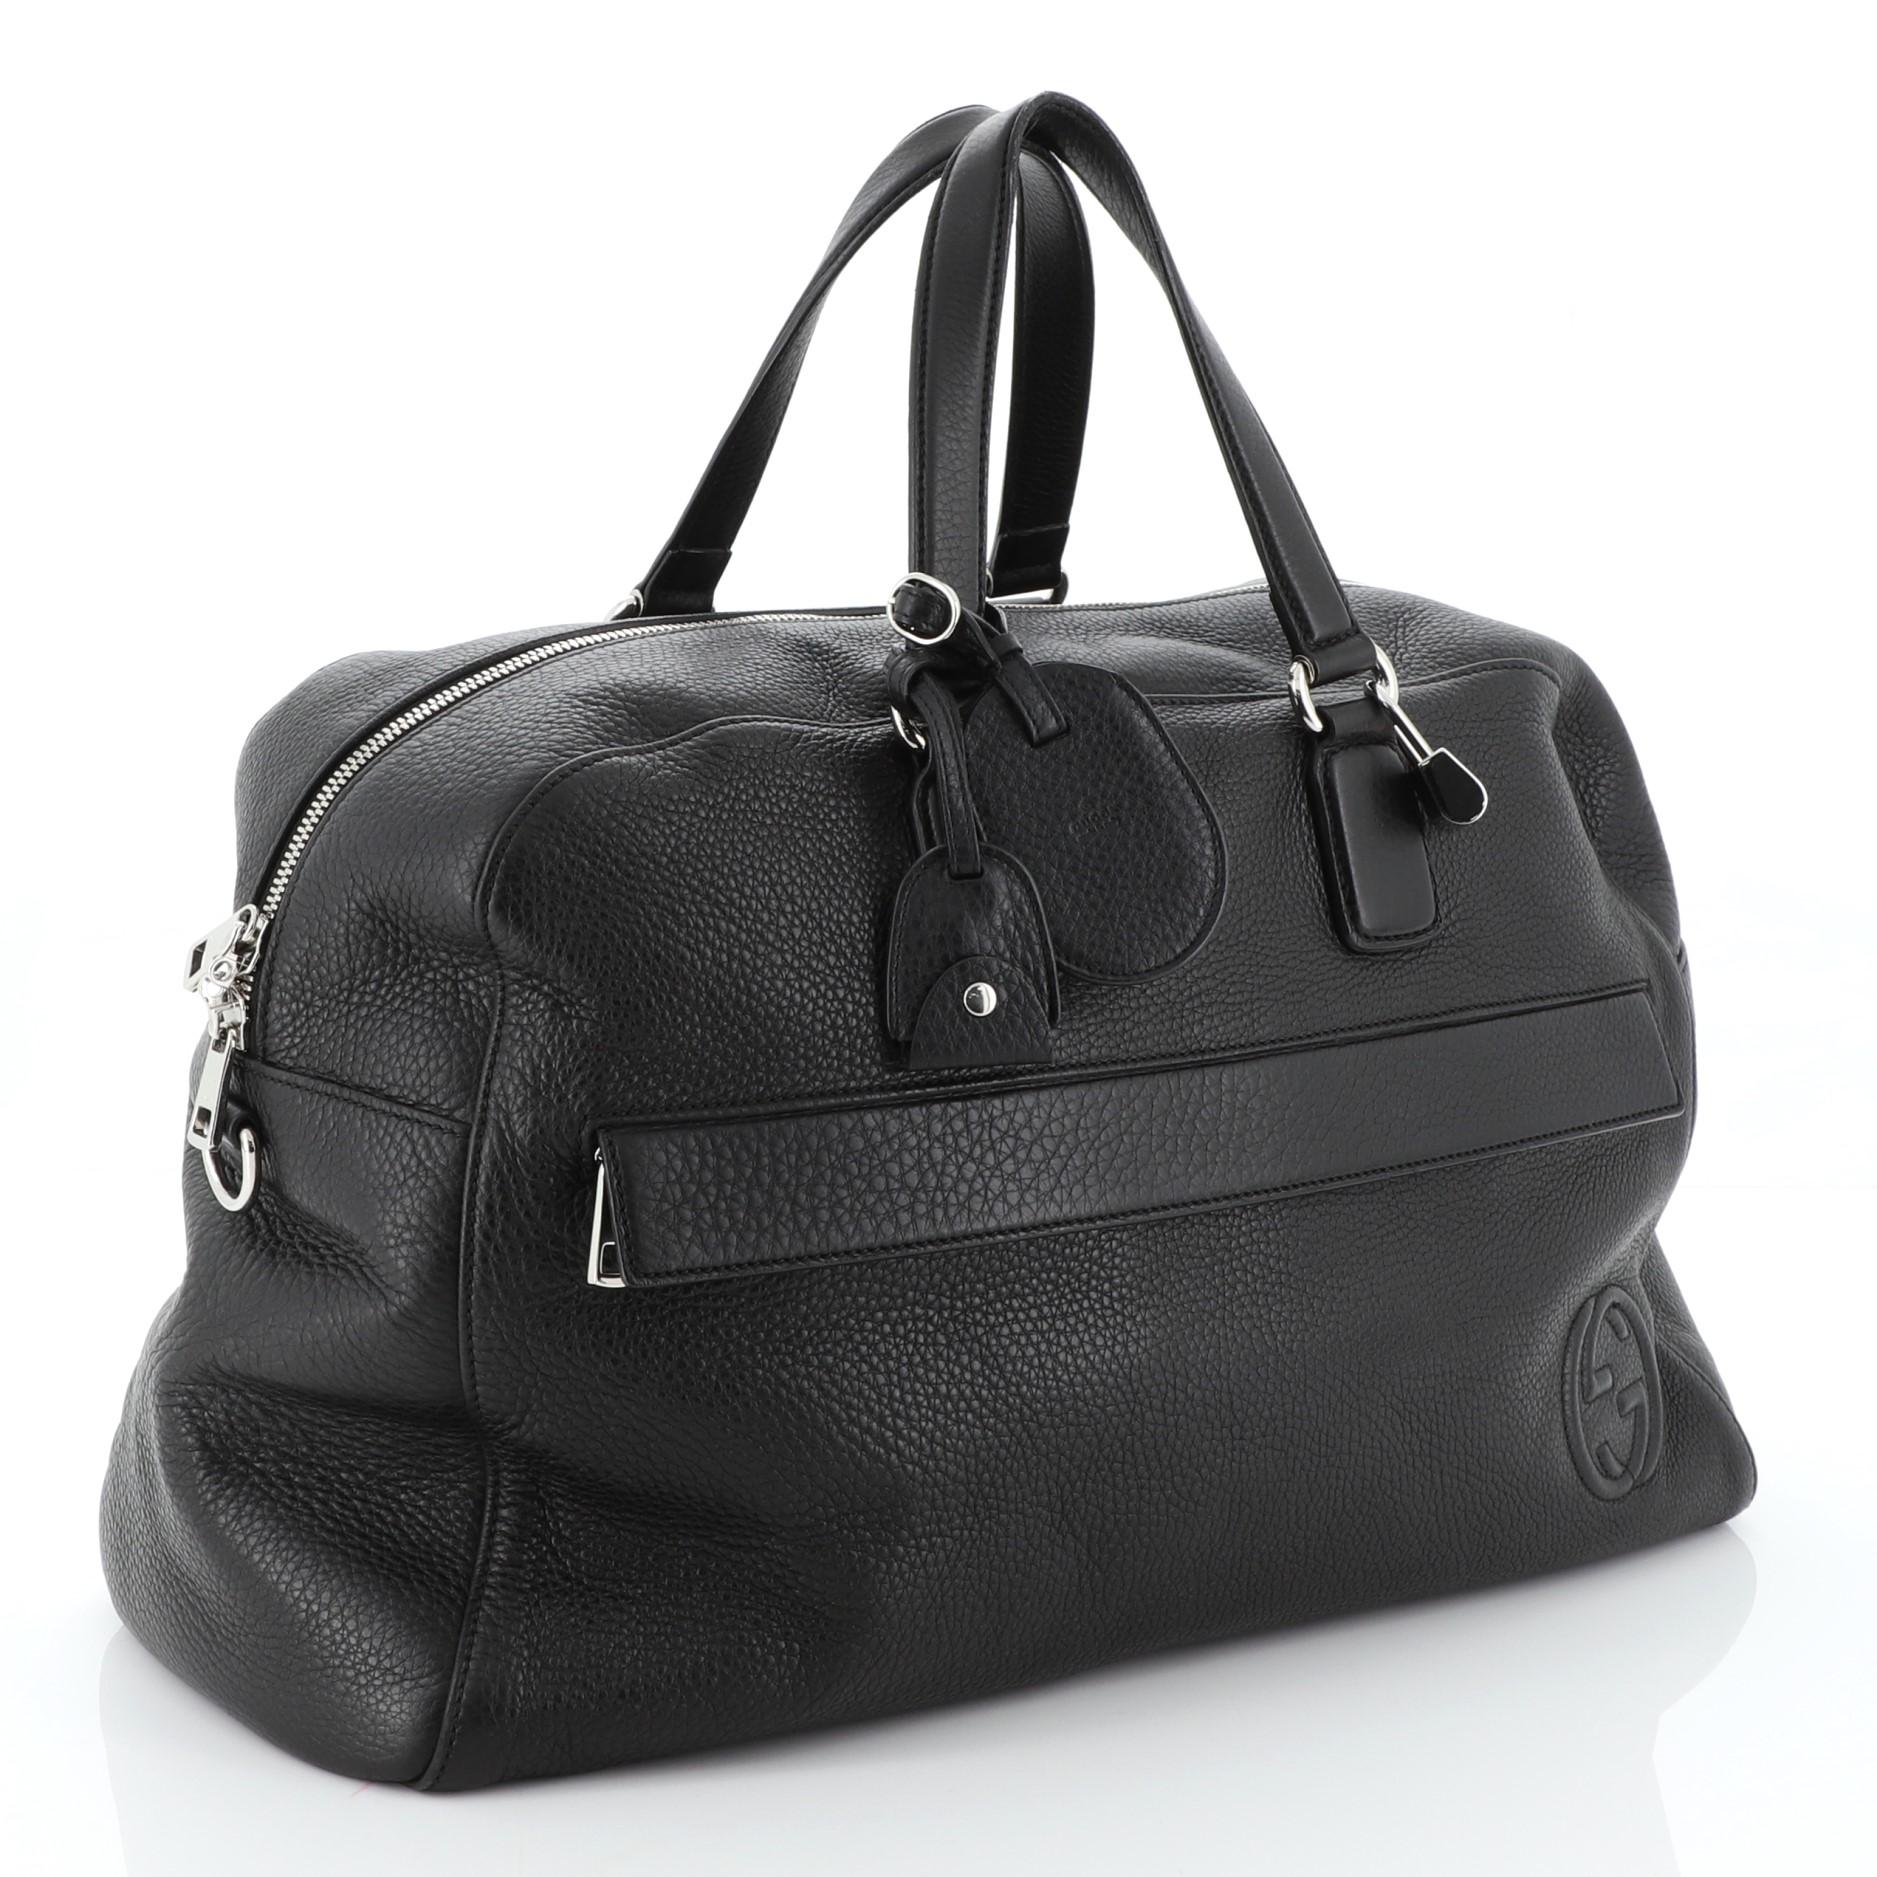 This Gucci Soho Duffle Bag Leather Large, crafted in black leather, features dual flat leather handles, front zip pocket, protective base studs, and silver-tone hardware. Its top zip closure opens to a neutral fabric interior with side zip and slip